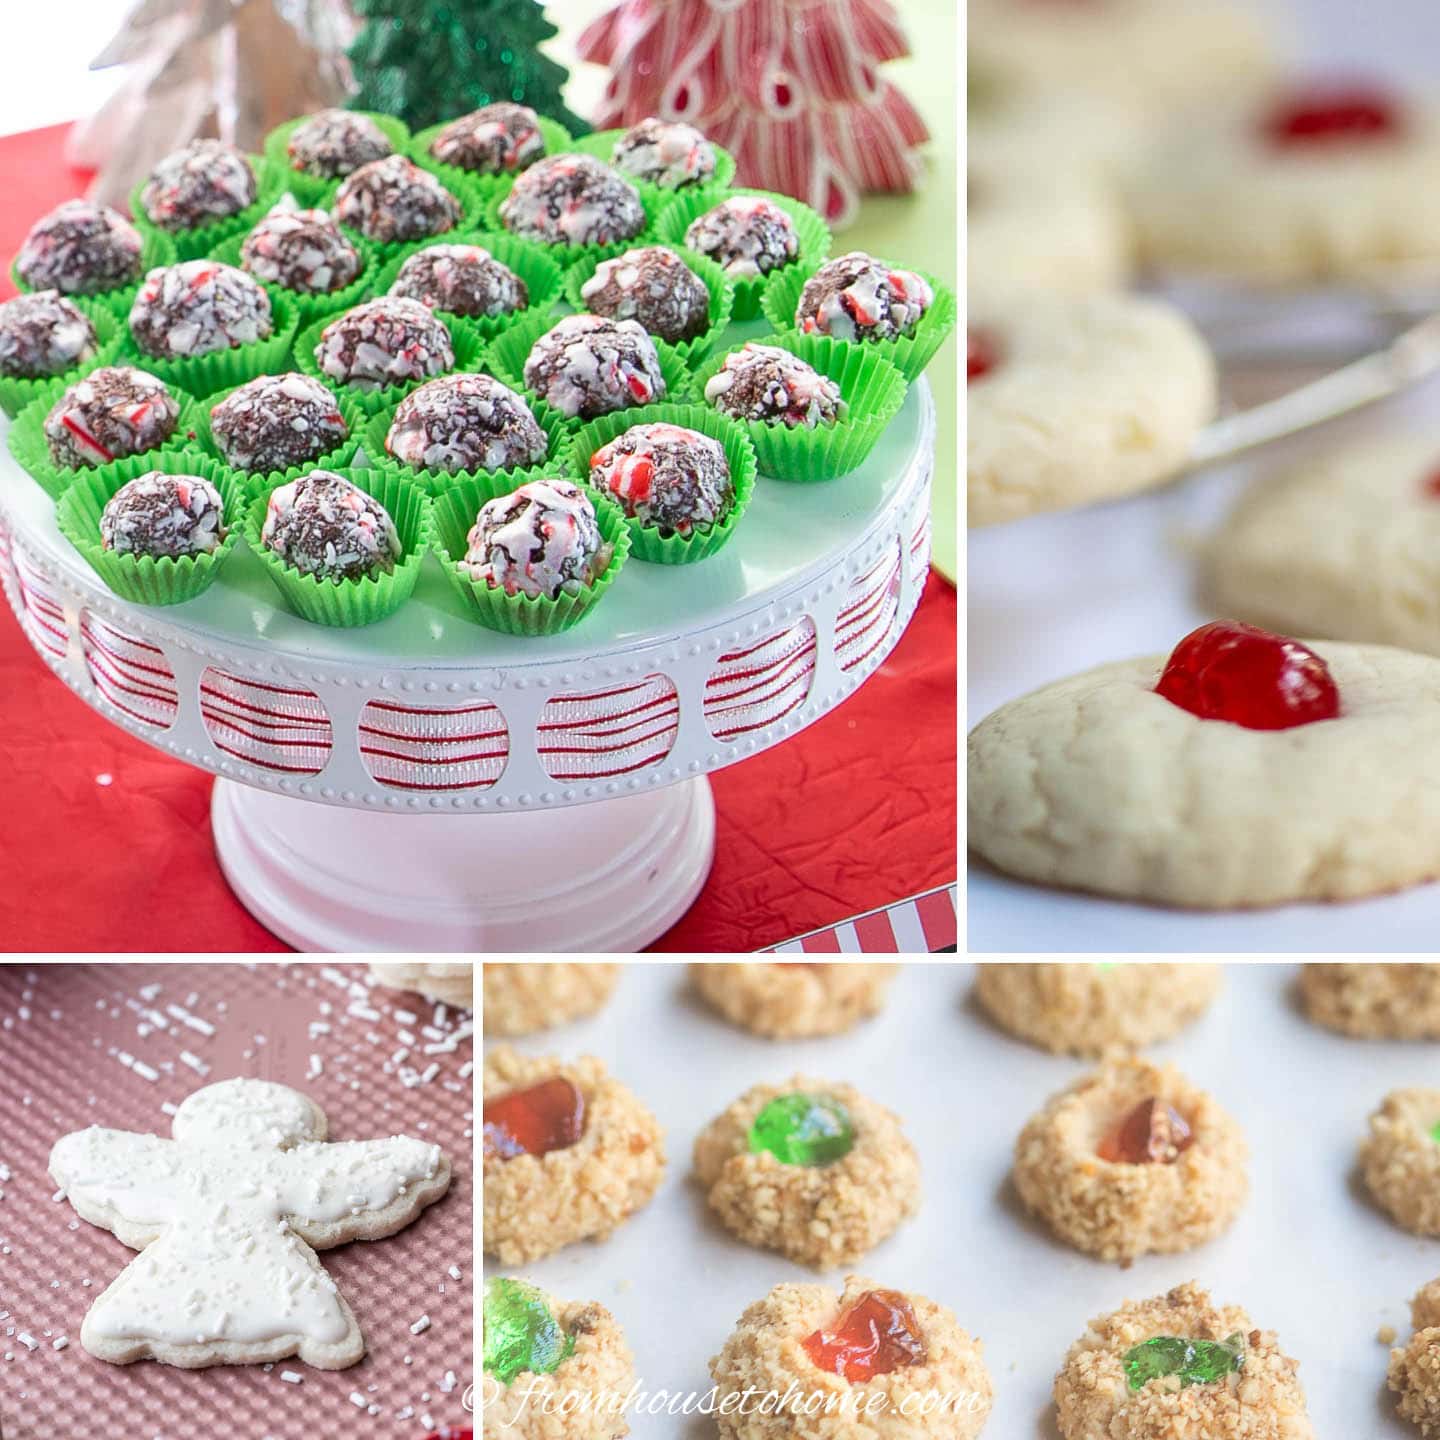 Peppermint fudge balls, lemon cream cheese cookies, decorated angle sugar cookies and holiday Thimble cookies